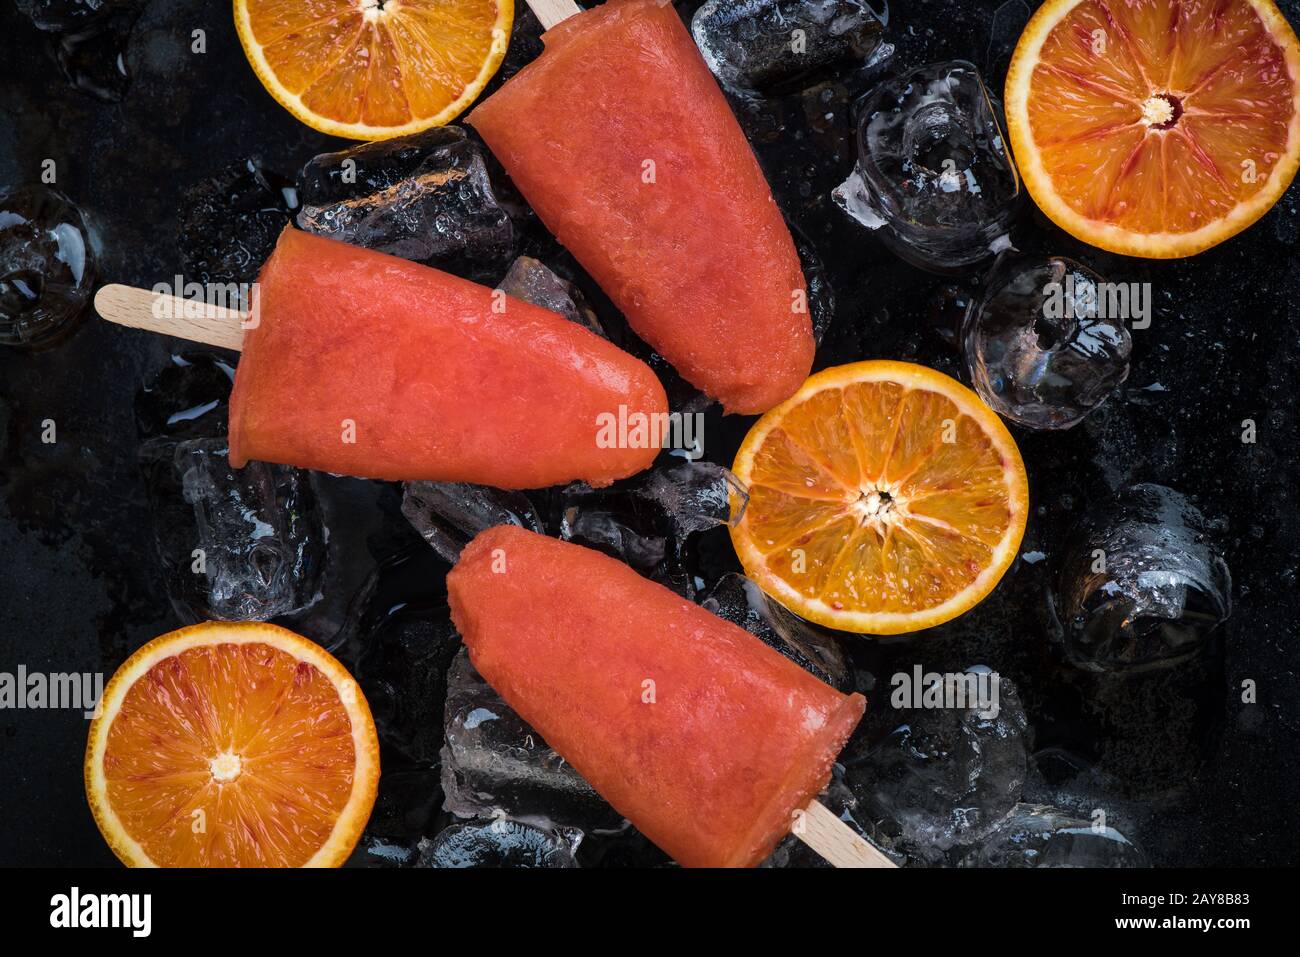 Healthy snack for hot summer days Stock Photo